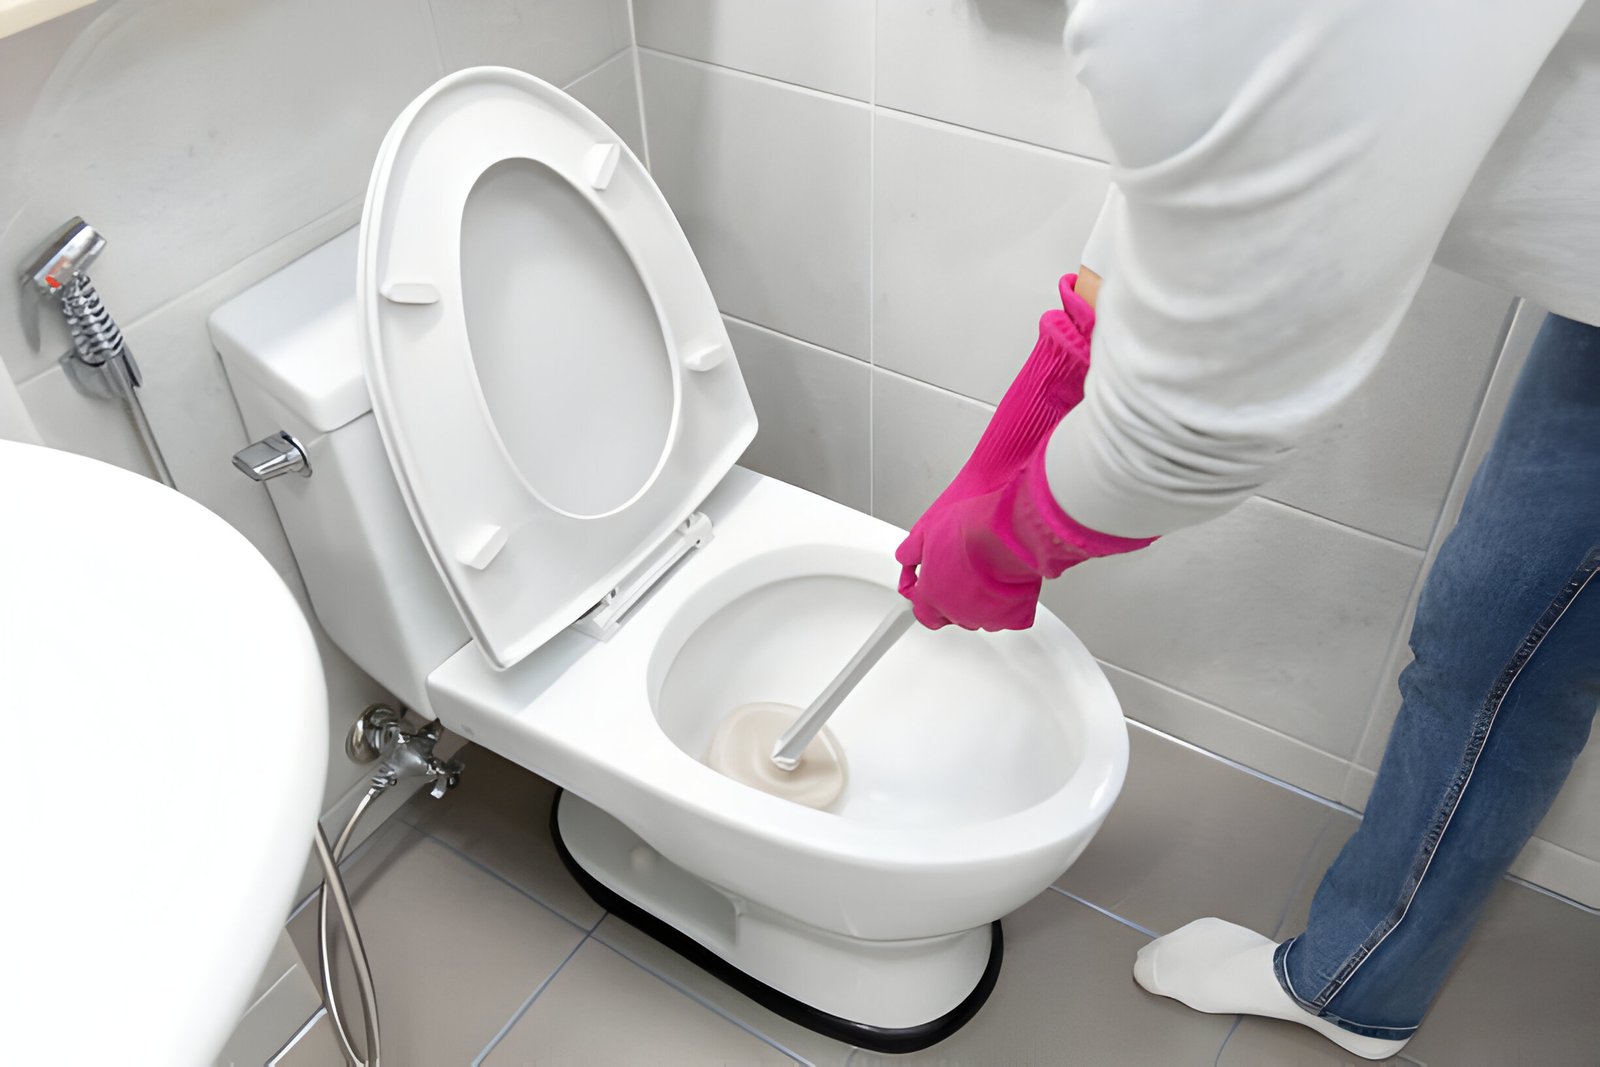 Top-Rated Toilet Clog Remover: How to Choose the Best One